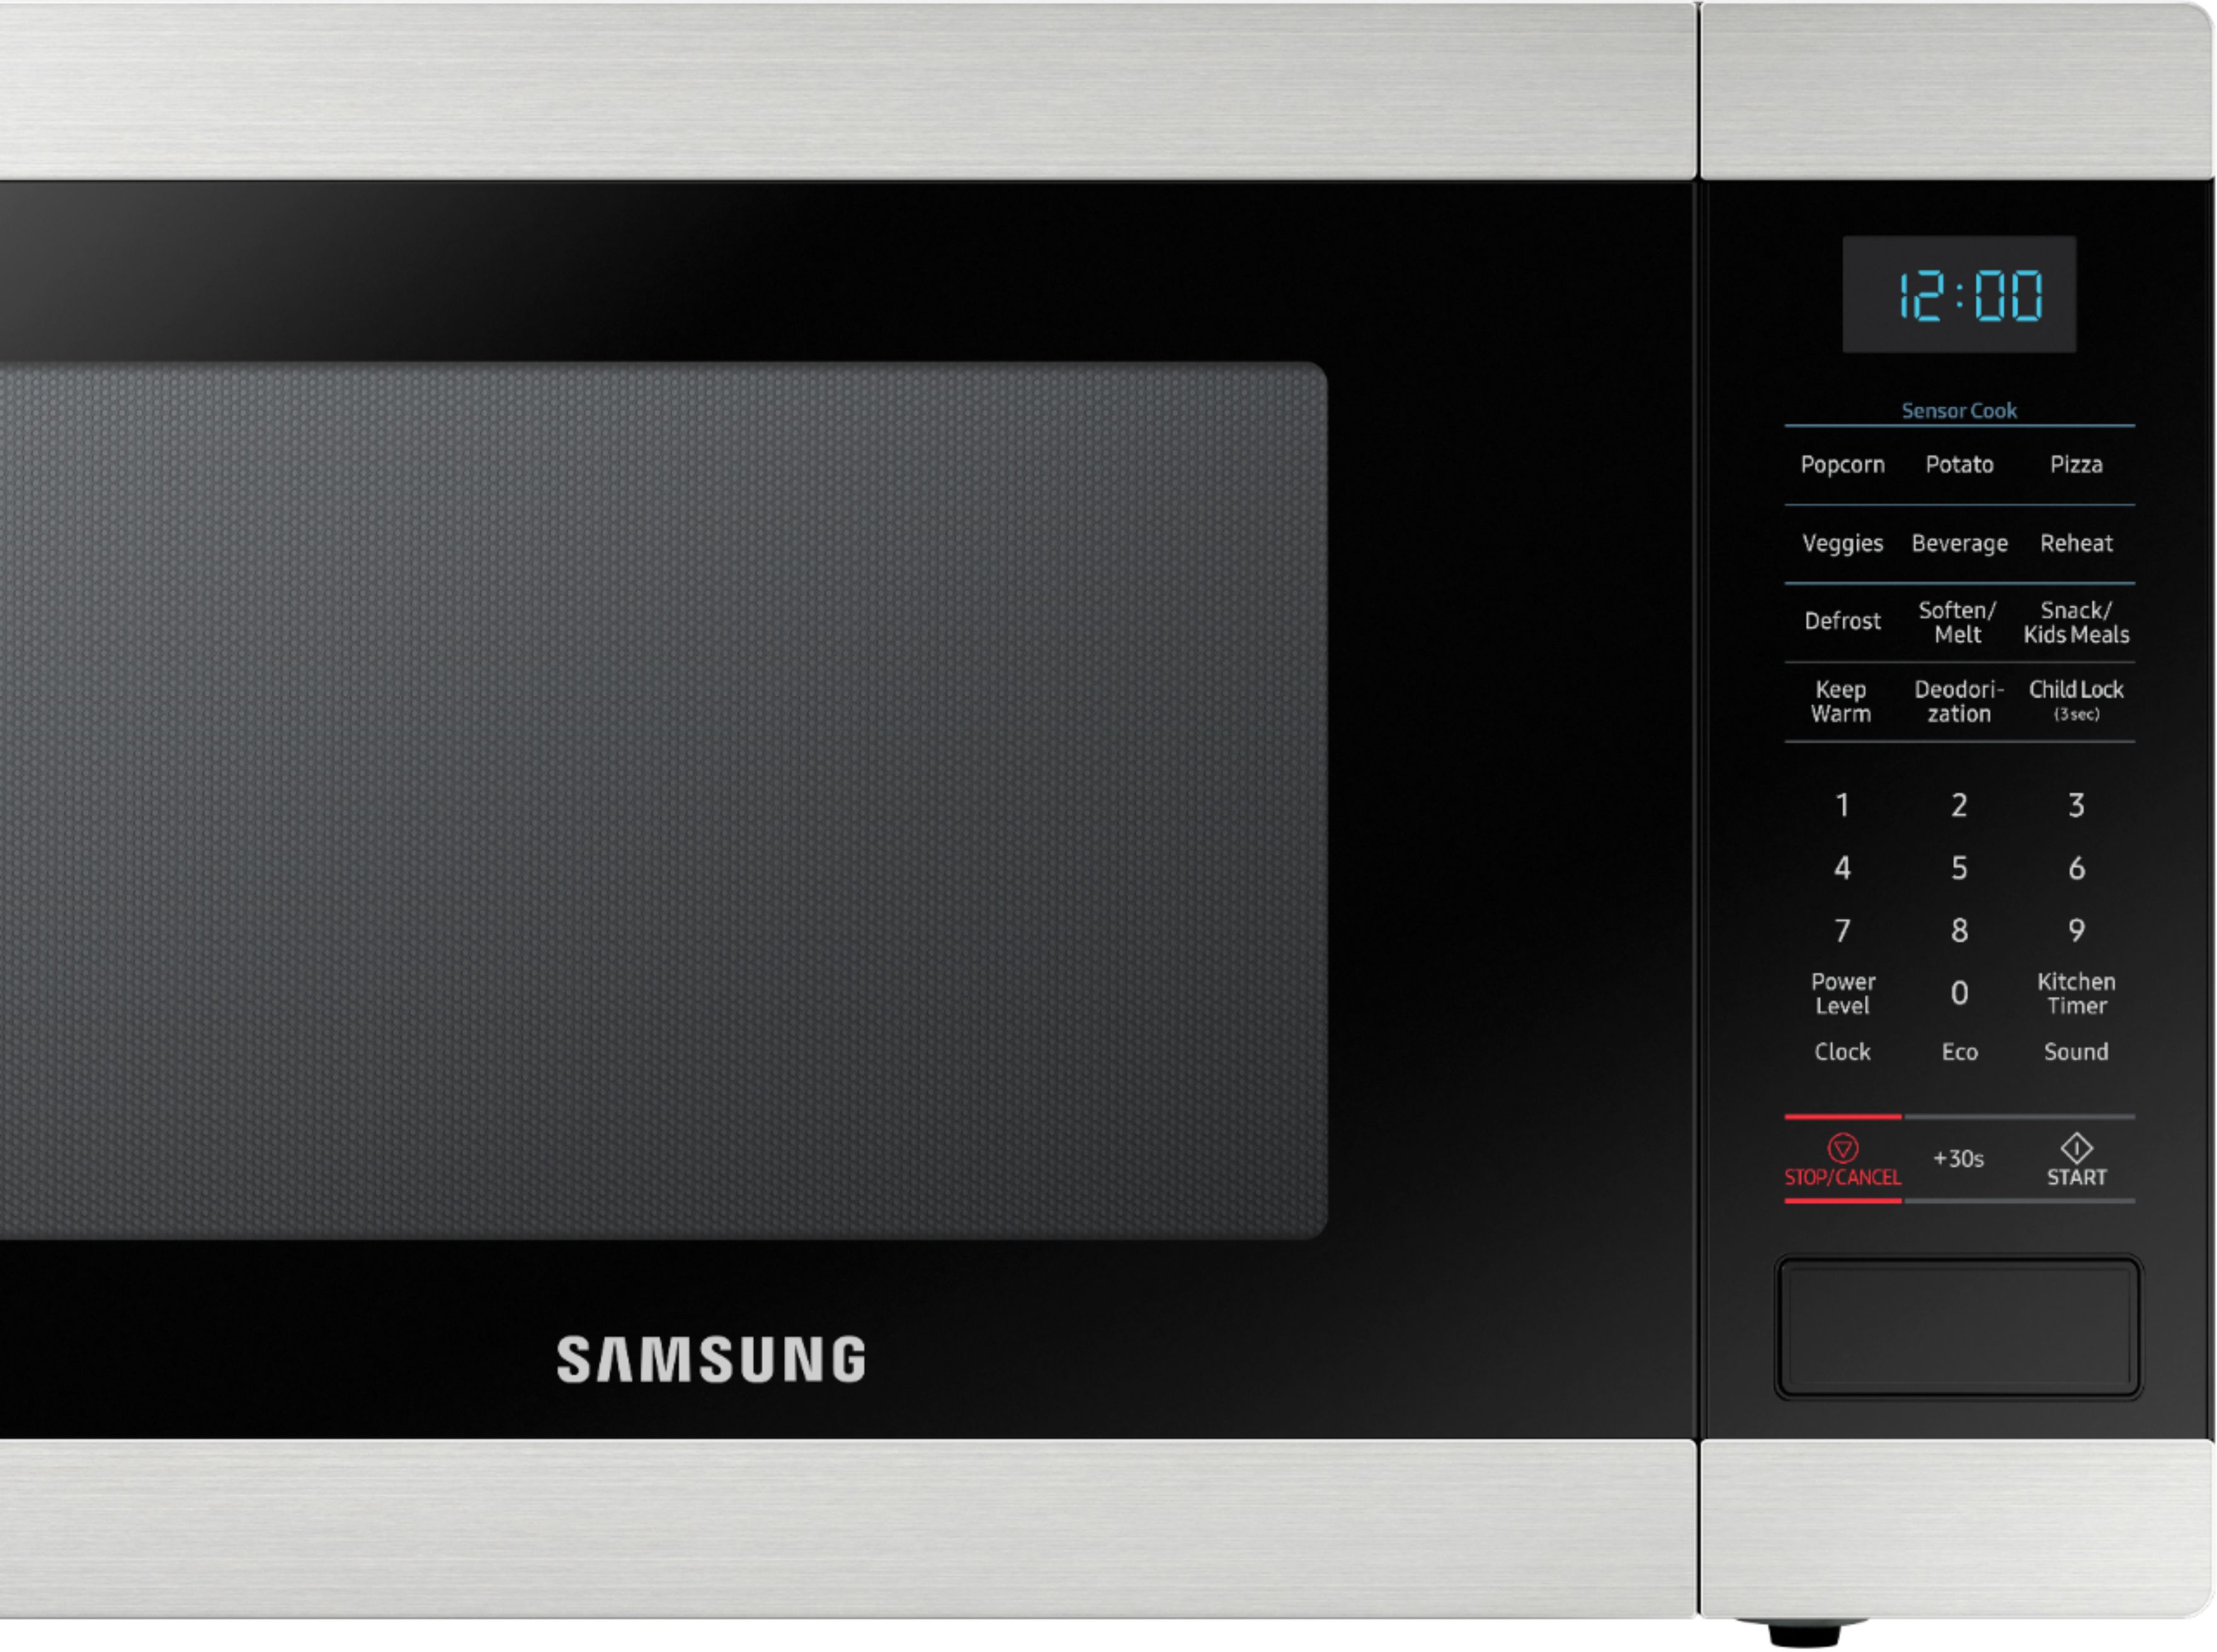 1.9 cu. ft. Countertop Microwave with Sensor Cooking in